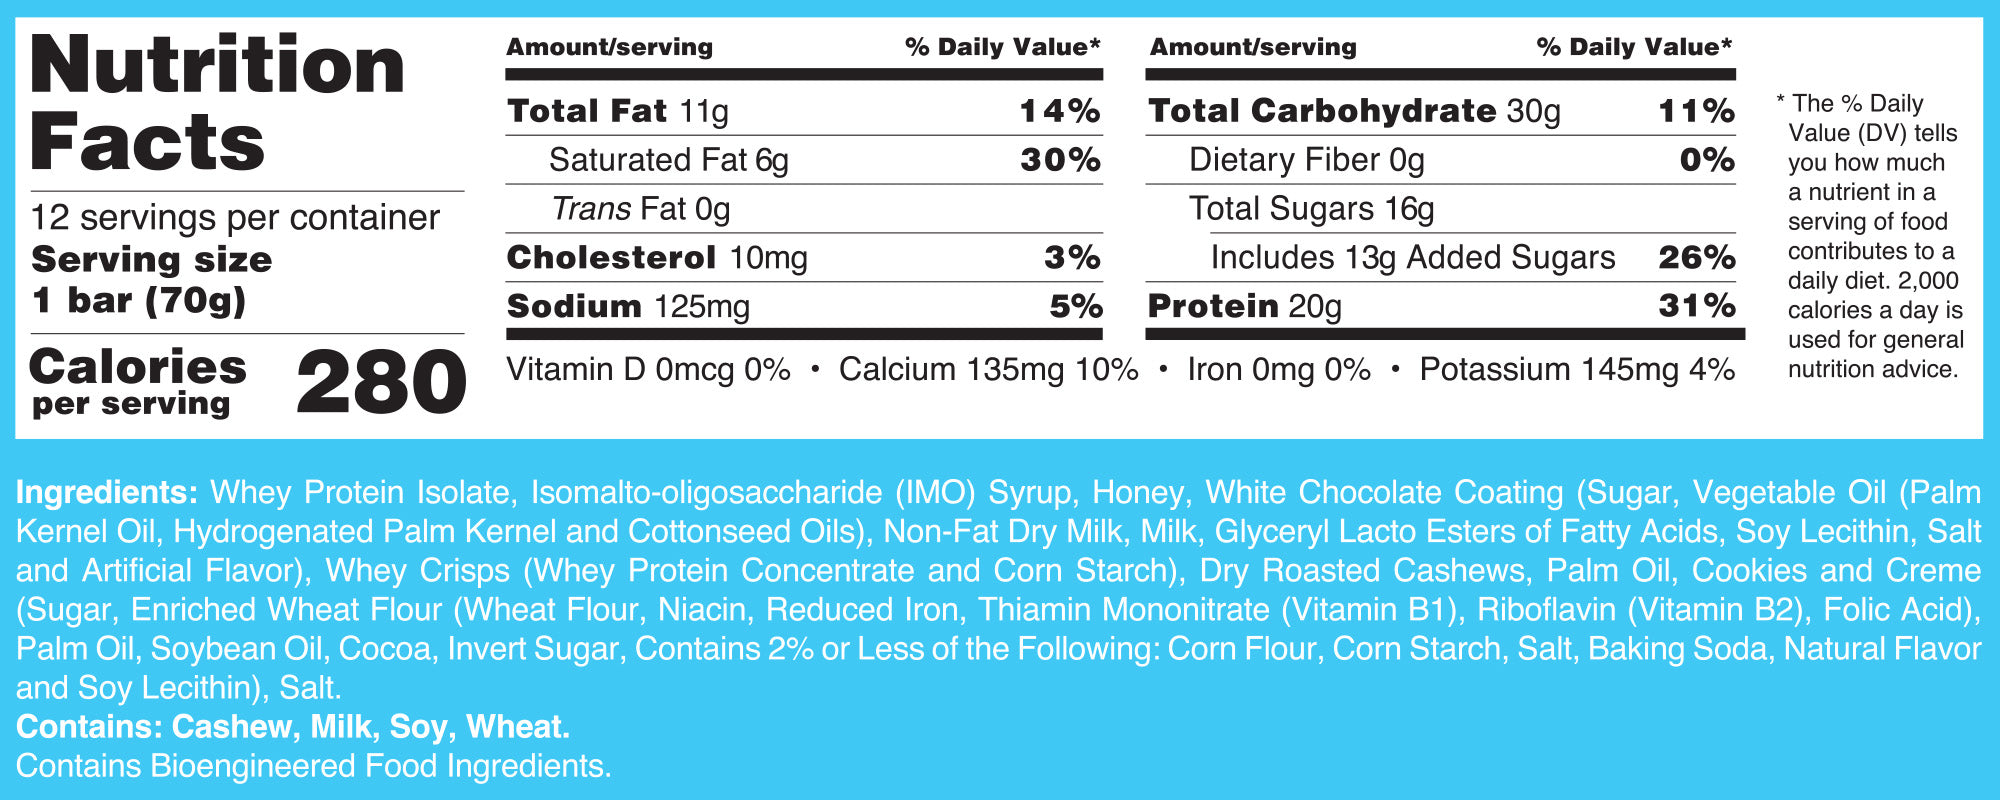 Cookies & Cream Nutrition Facts